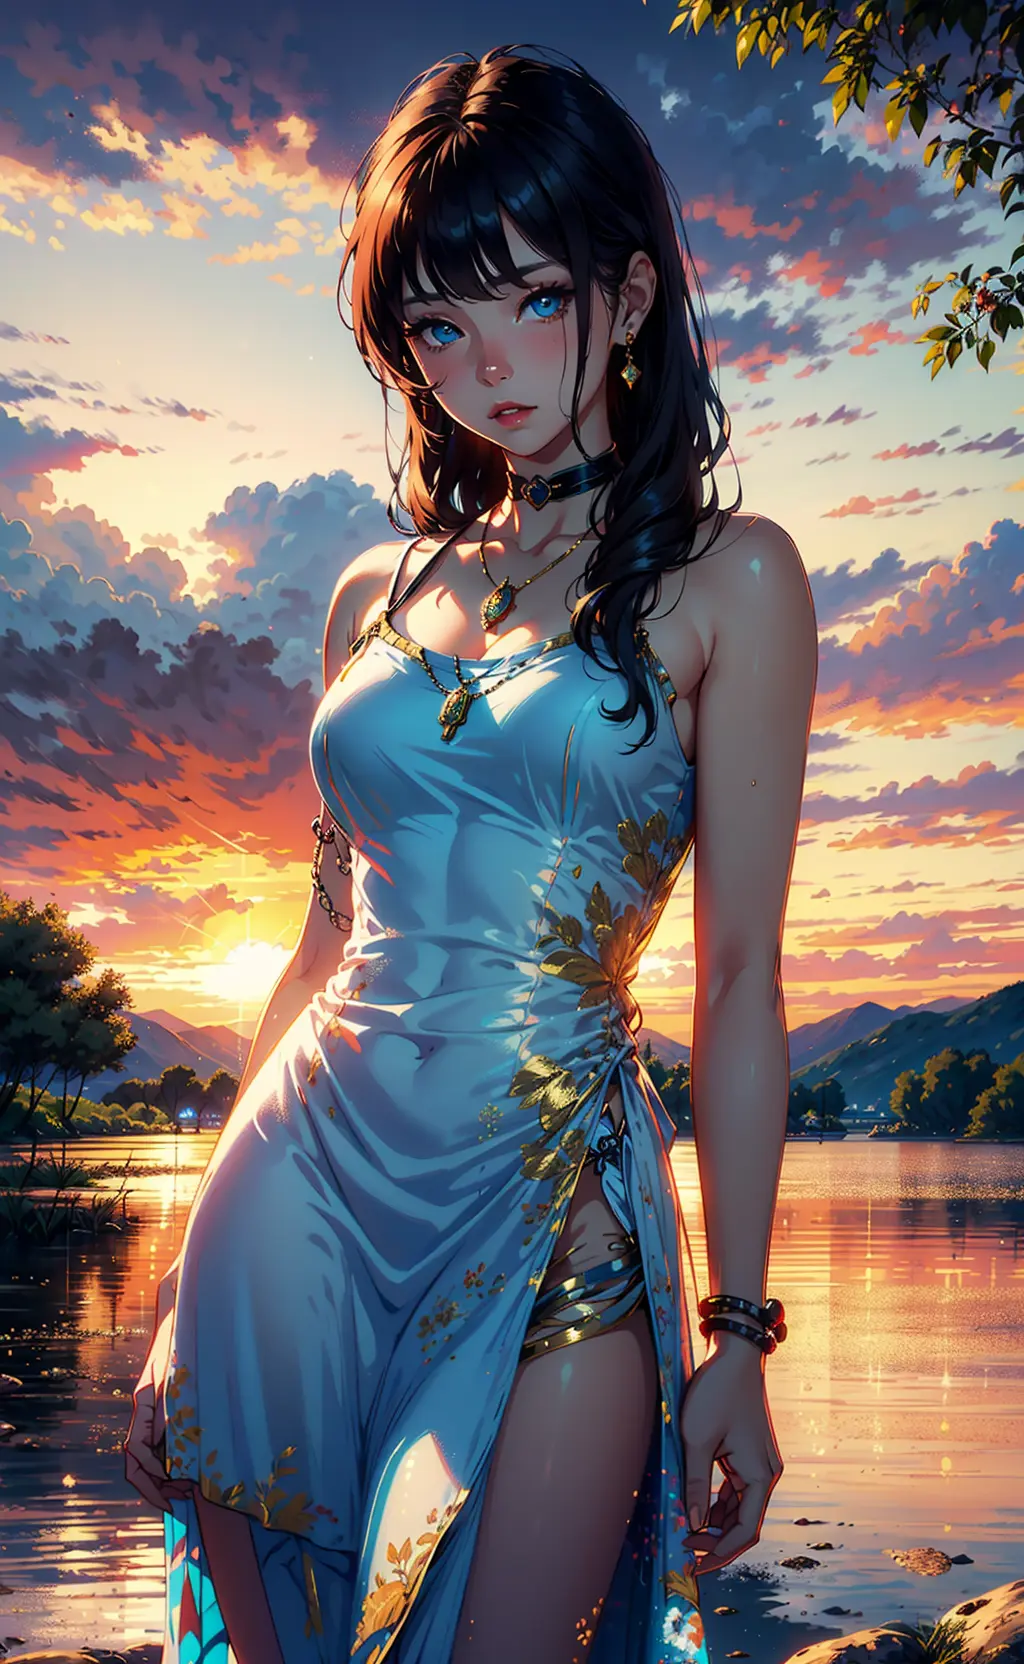 1 girl, serene expression, mesmerizing eyes, straight long hair, flowing dress, poised posture, porcelain skin, subtle blush, crystal pendant
BREAK
golden hour, (rim lighting):1.2, warm tones, sun flare, soft shadows, vibrant colors, painterly effect, dreamy atmosphere
BREAK
scenic lake, distant mountains, willow tree, calm water, reflection, sunlit clouds, peaceful ambiance, idyllic sunset, ultra detailed, official art, unity 8k wallpaper
, zentangle, mandala